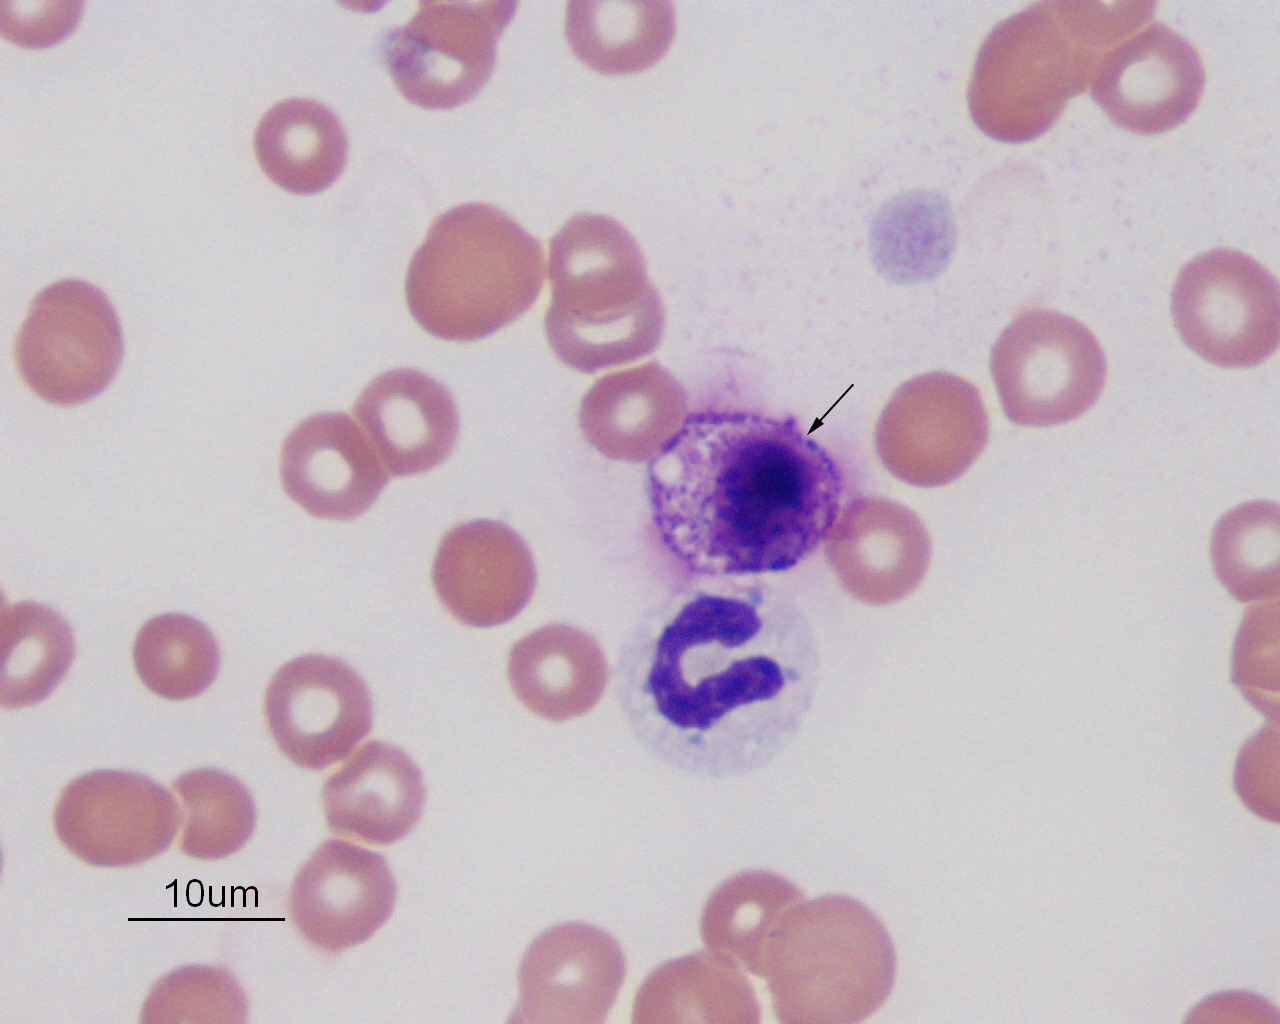 Mast cell in blood